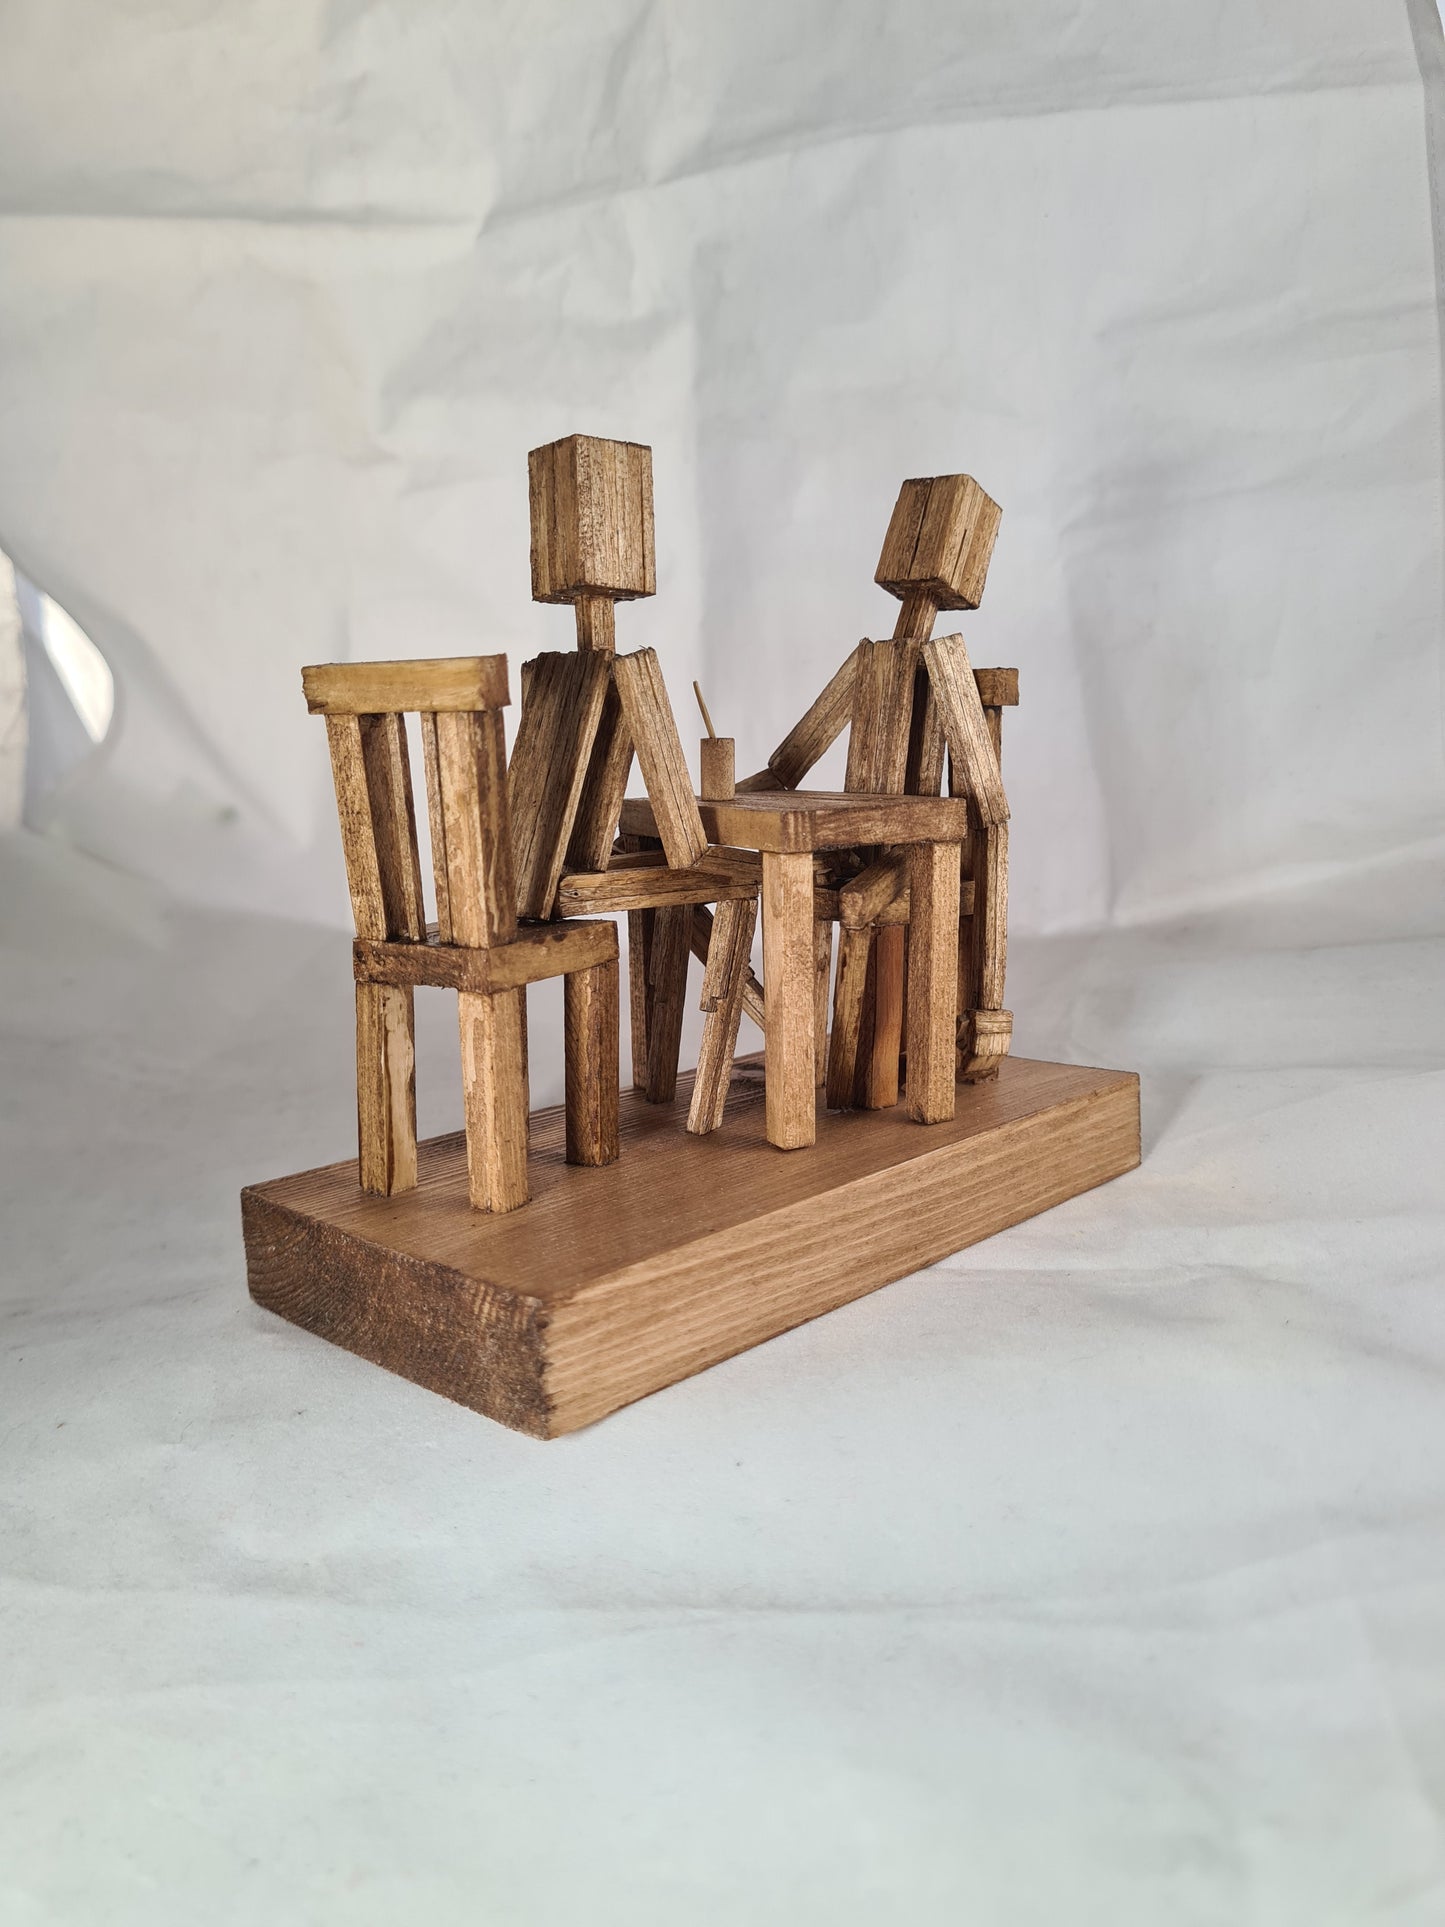 Sleight Of Hand - Handcrafted Wooden Matchstick Figures - Gifts, Ornaments and Decor By Tiggidy Designs